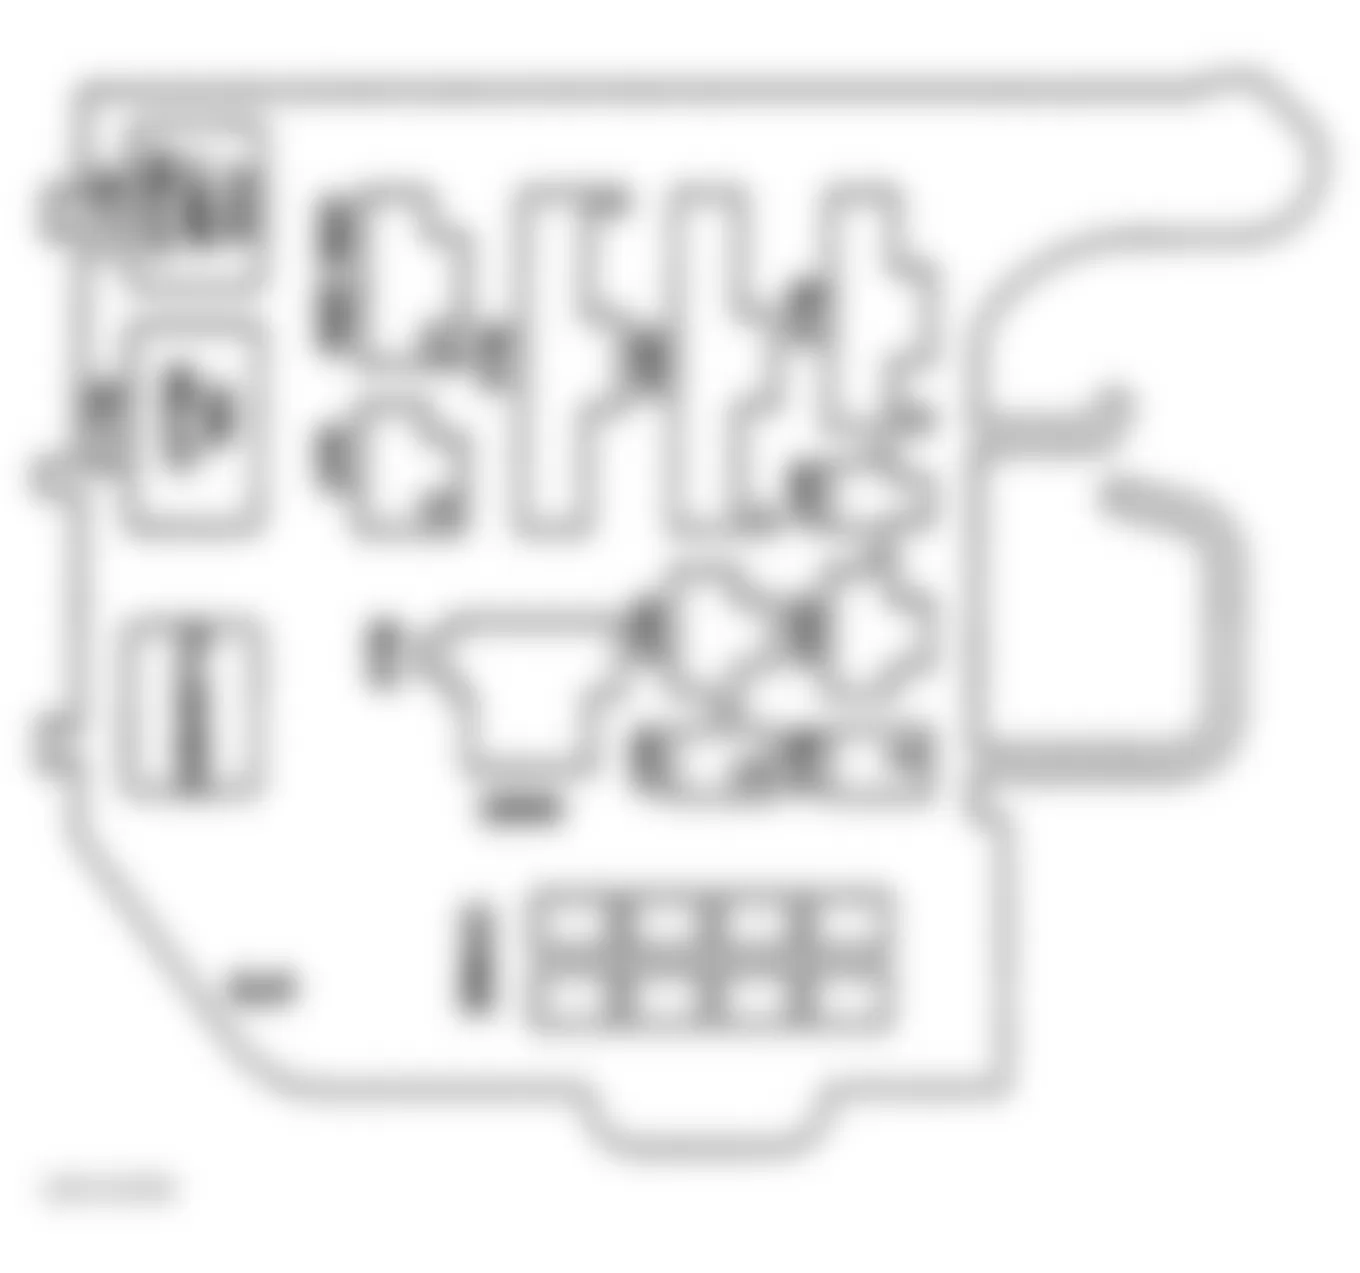 GMC Pickup C3500 1997 - Component Locations -  Identifying Convenience Center Components